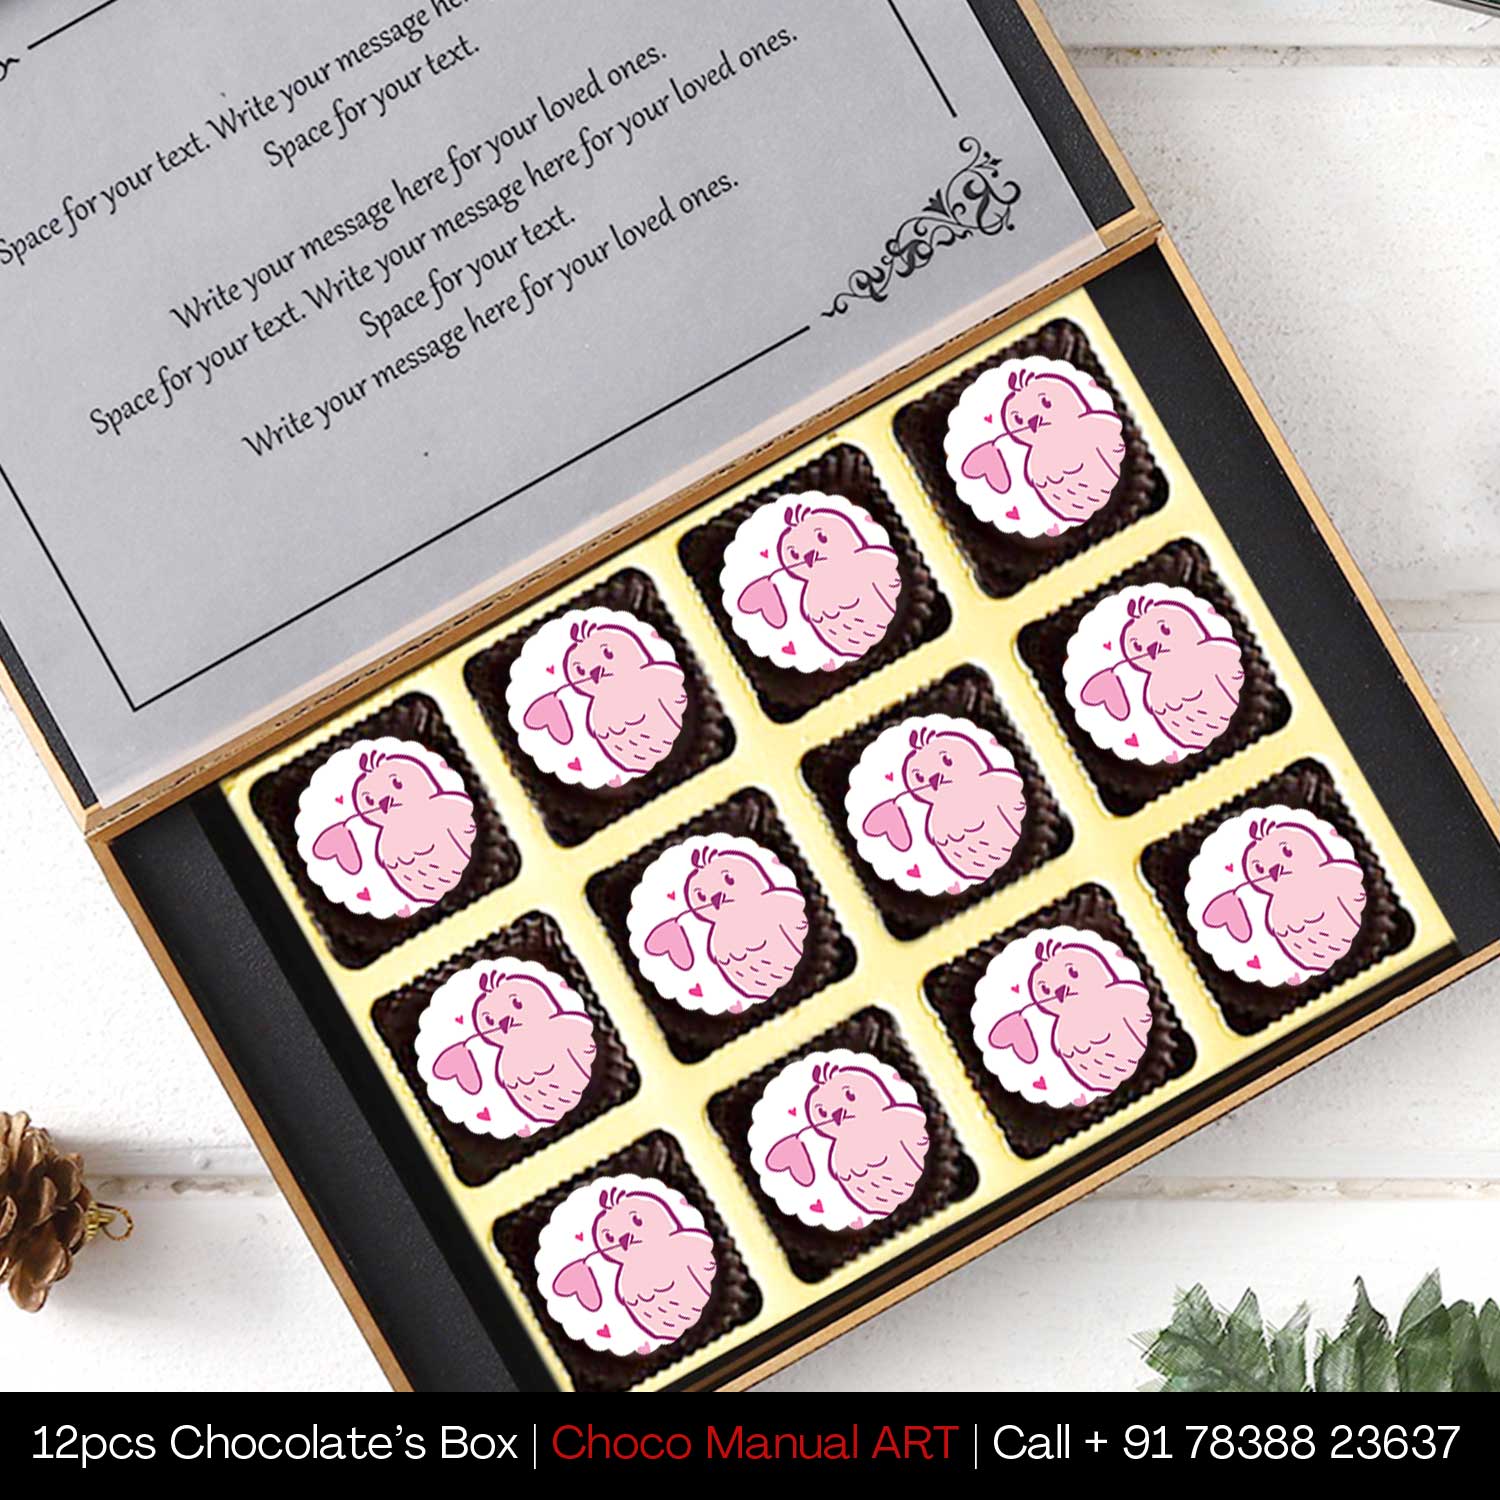 BUY Sorry Chocolate Gift Boxes with Personalisation - Choco ManualART